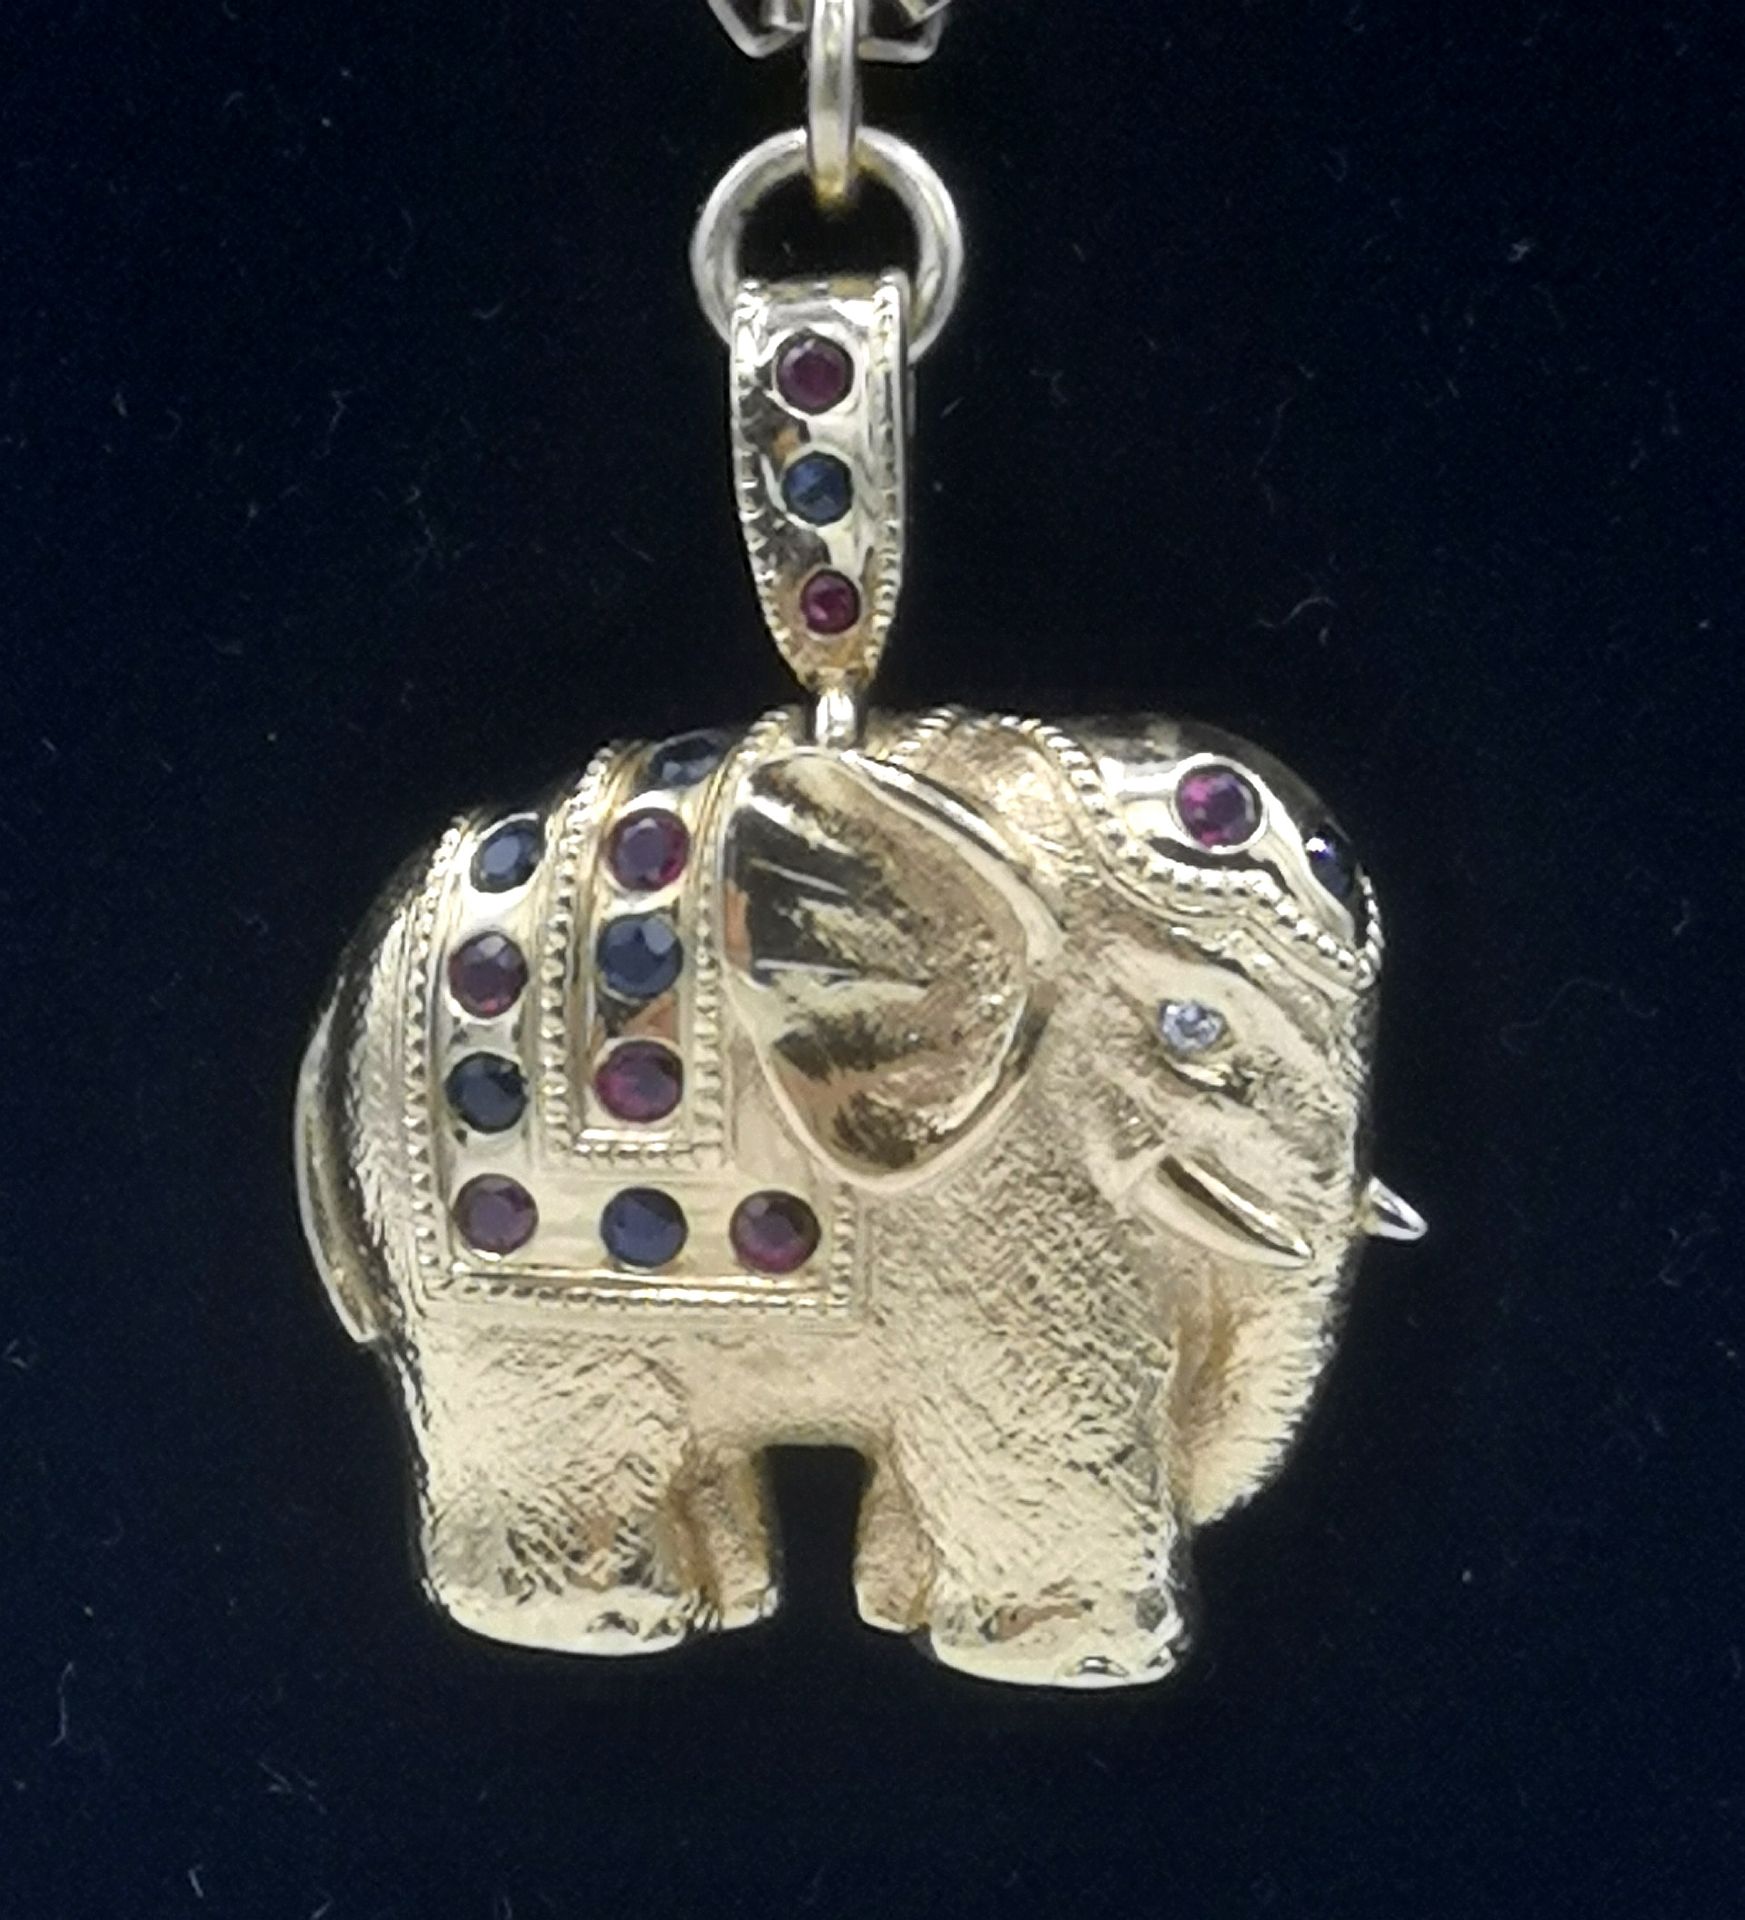 18ct gold elephant pendant set with gemstones on 18ct gold chain - Image 10 of 11